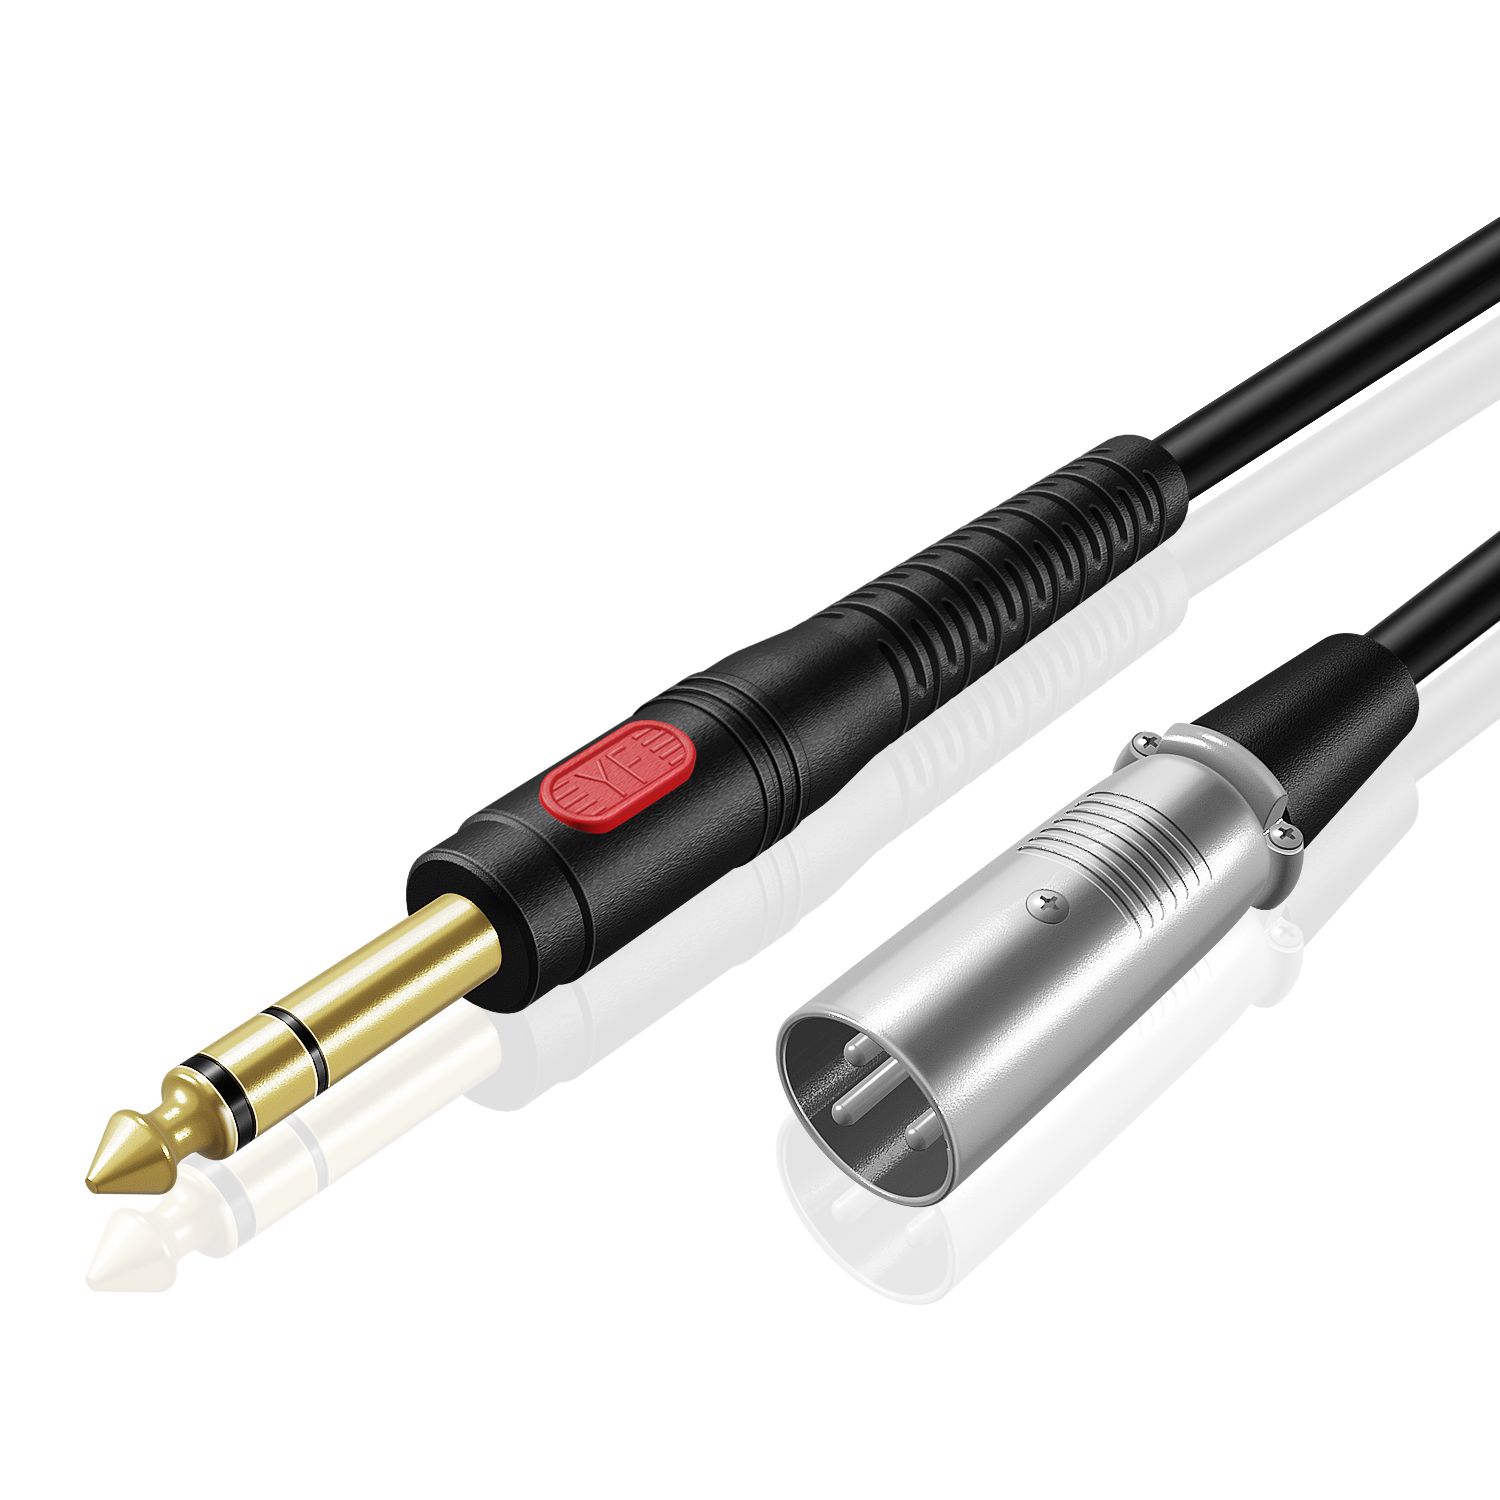 XLR Male to 6.3mm 1/4 inch TRS Male Pro Audio Video Stereo MIC Cable (10 FT), Gold Plated for Microphones, Powered Speakers, Stage, DJ, Studio Sound Consoles